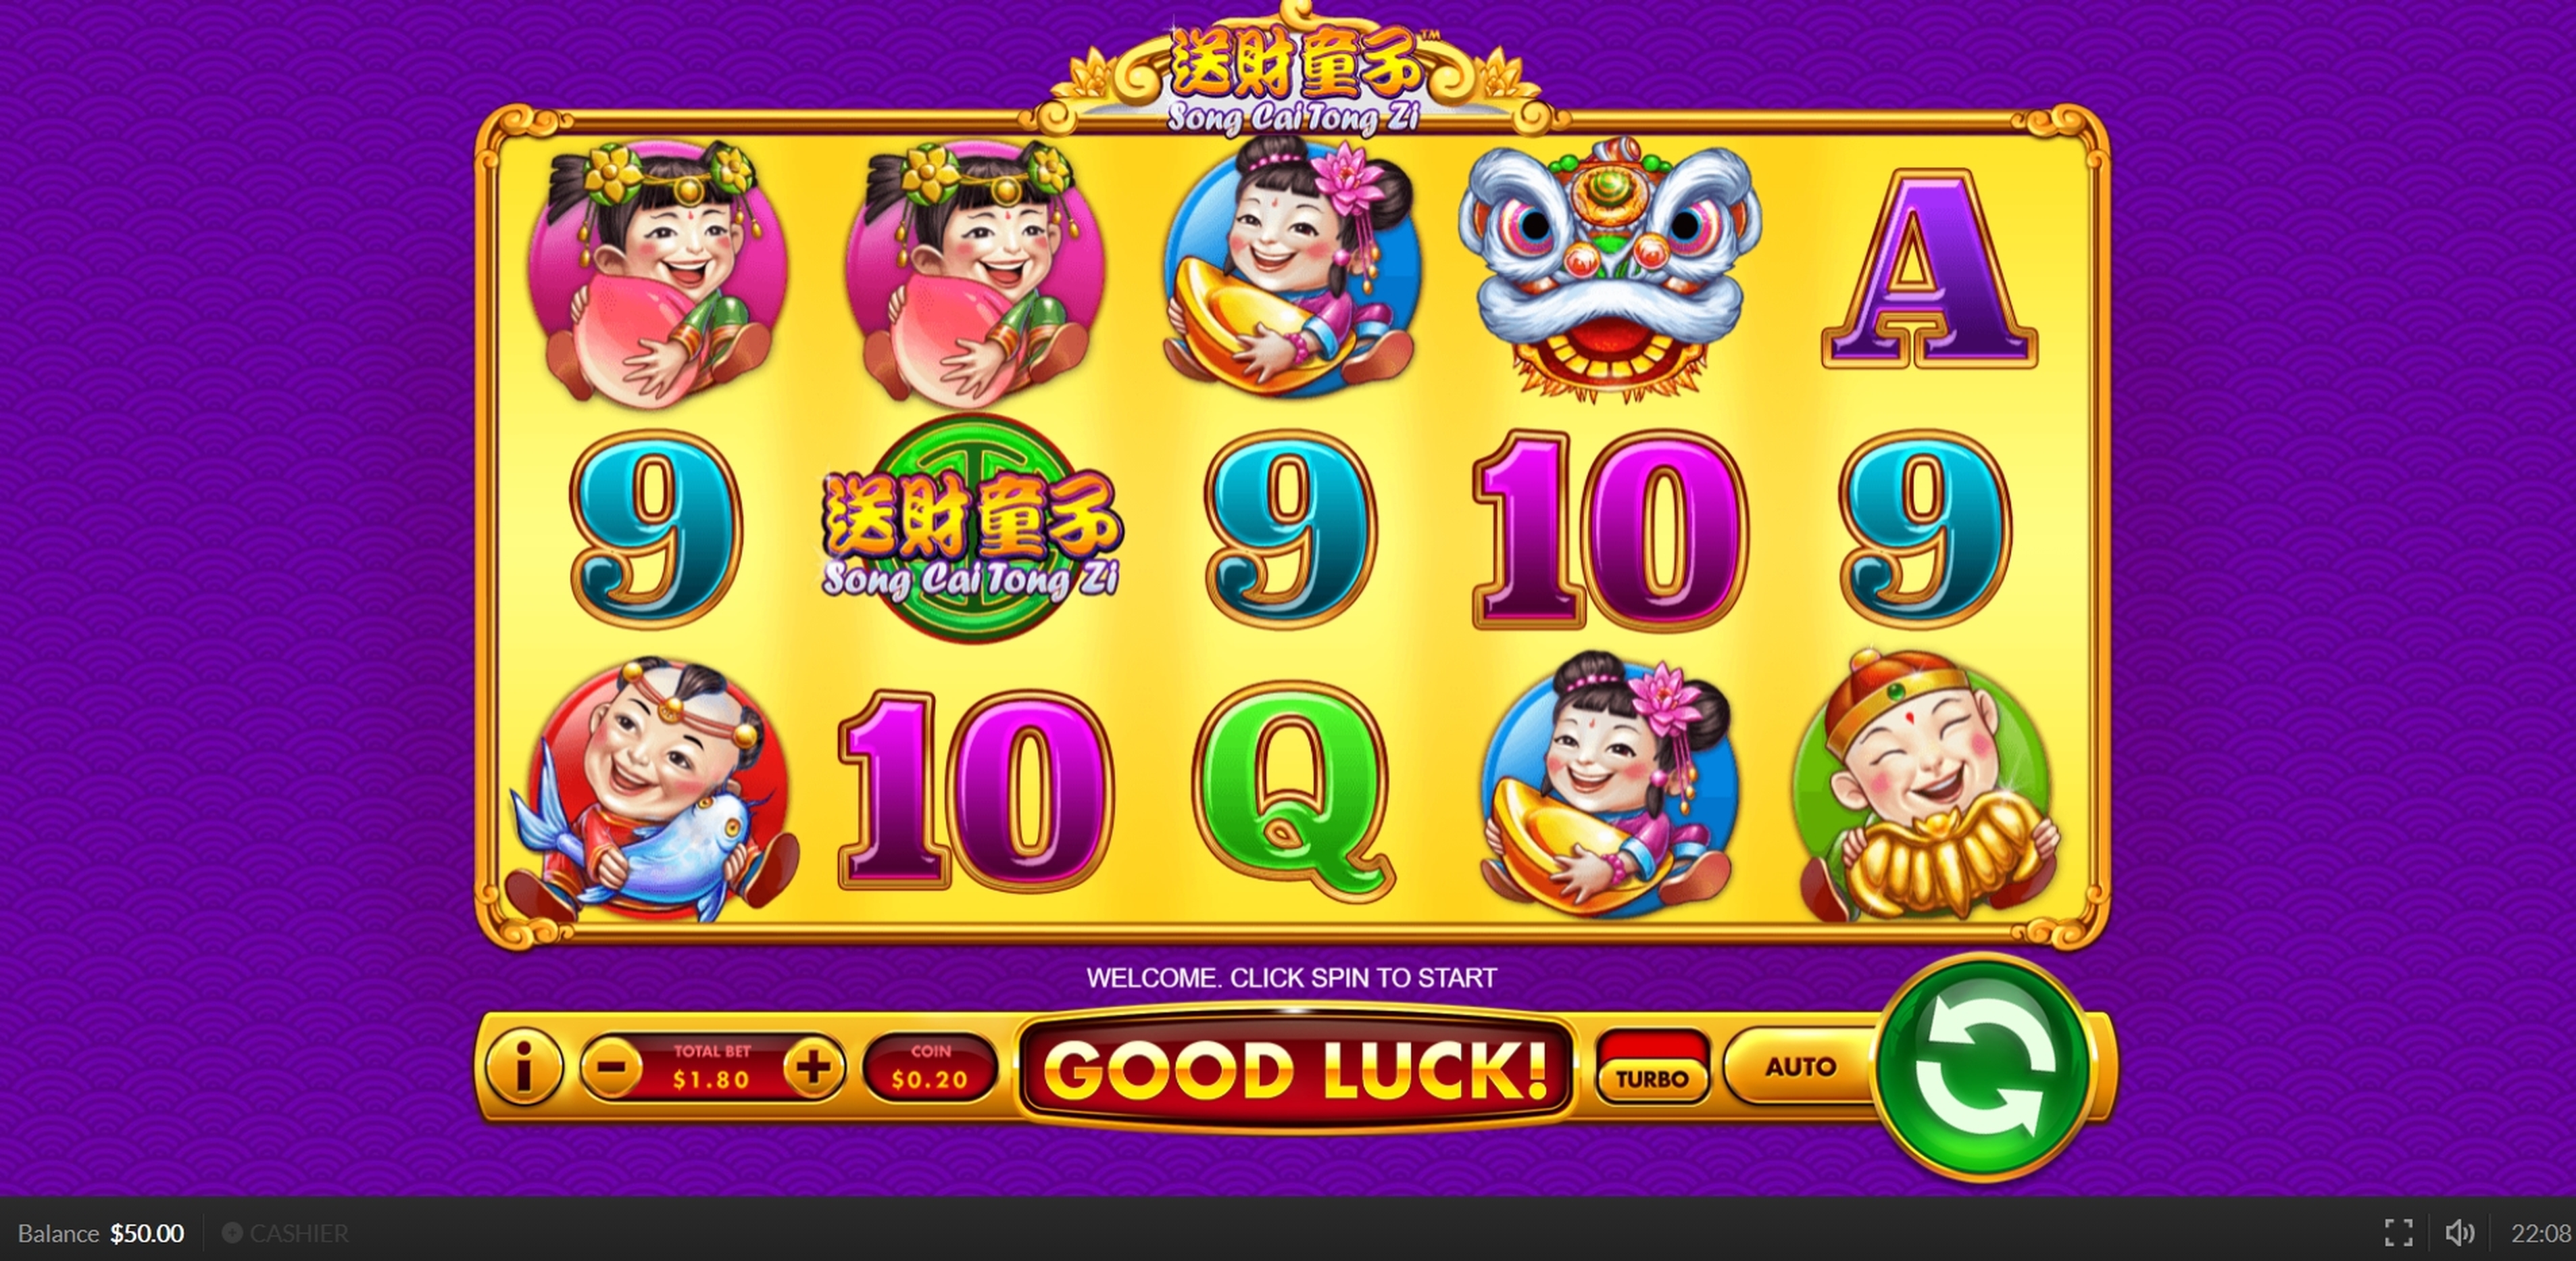 Reels in Song Cai Tong Zi Slot Game by Skywind